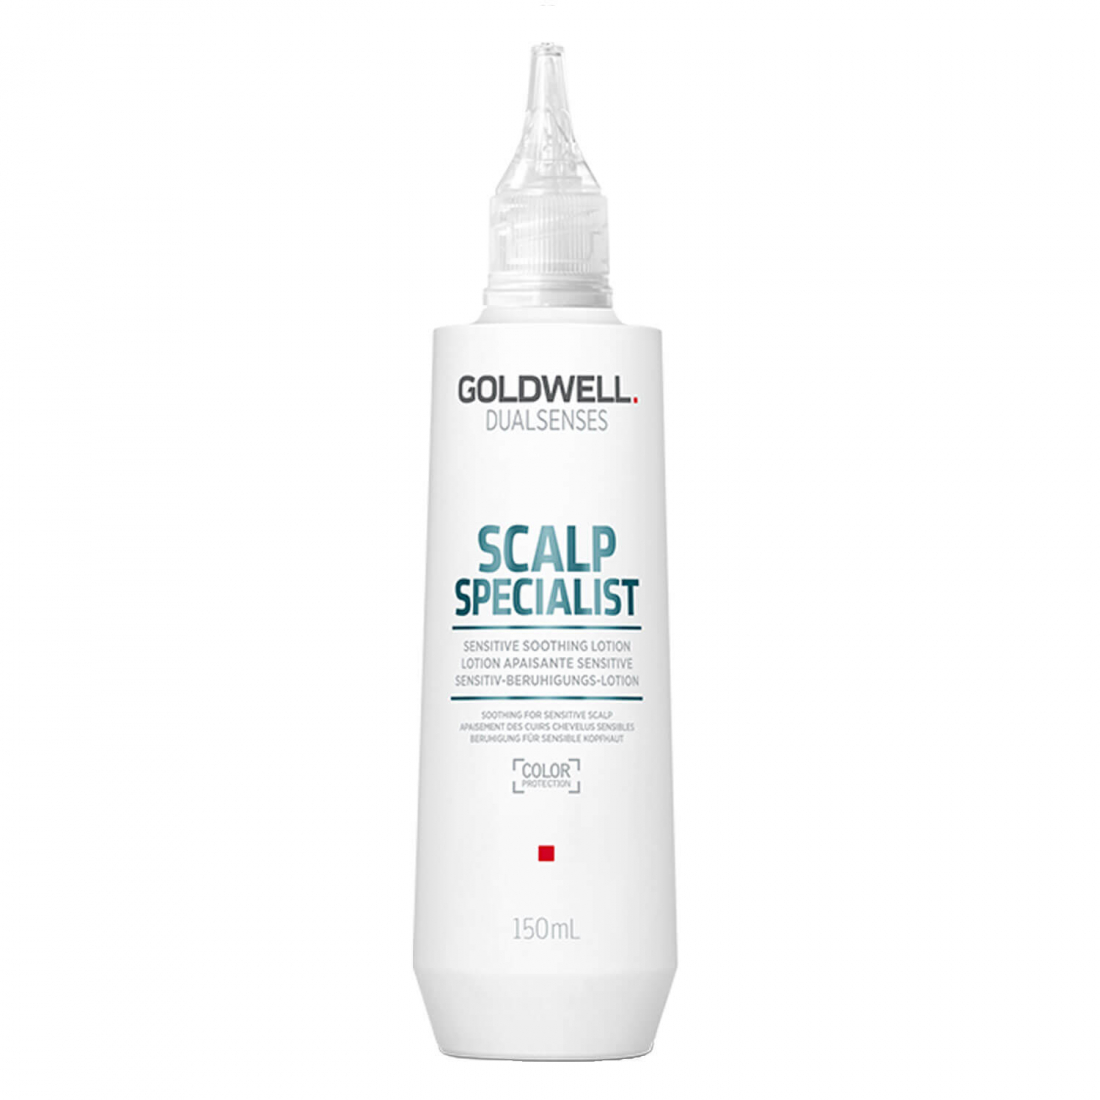 'Dualsenses Scalp Specialist Soothing' Scalp Lotion - 150 ml